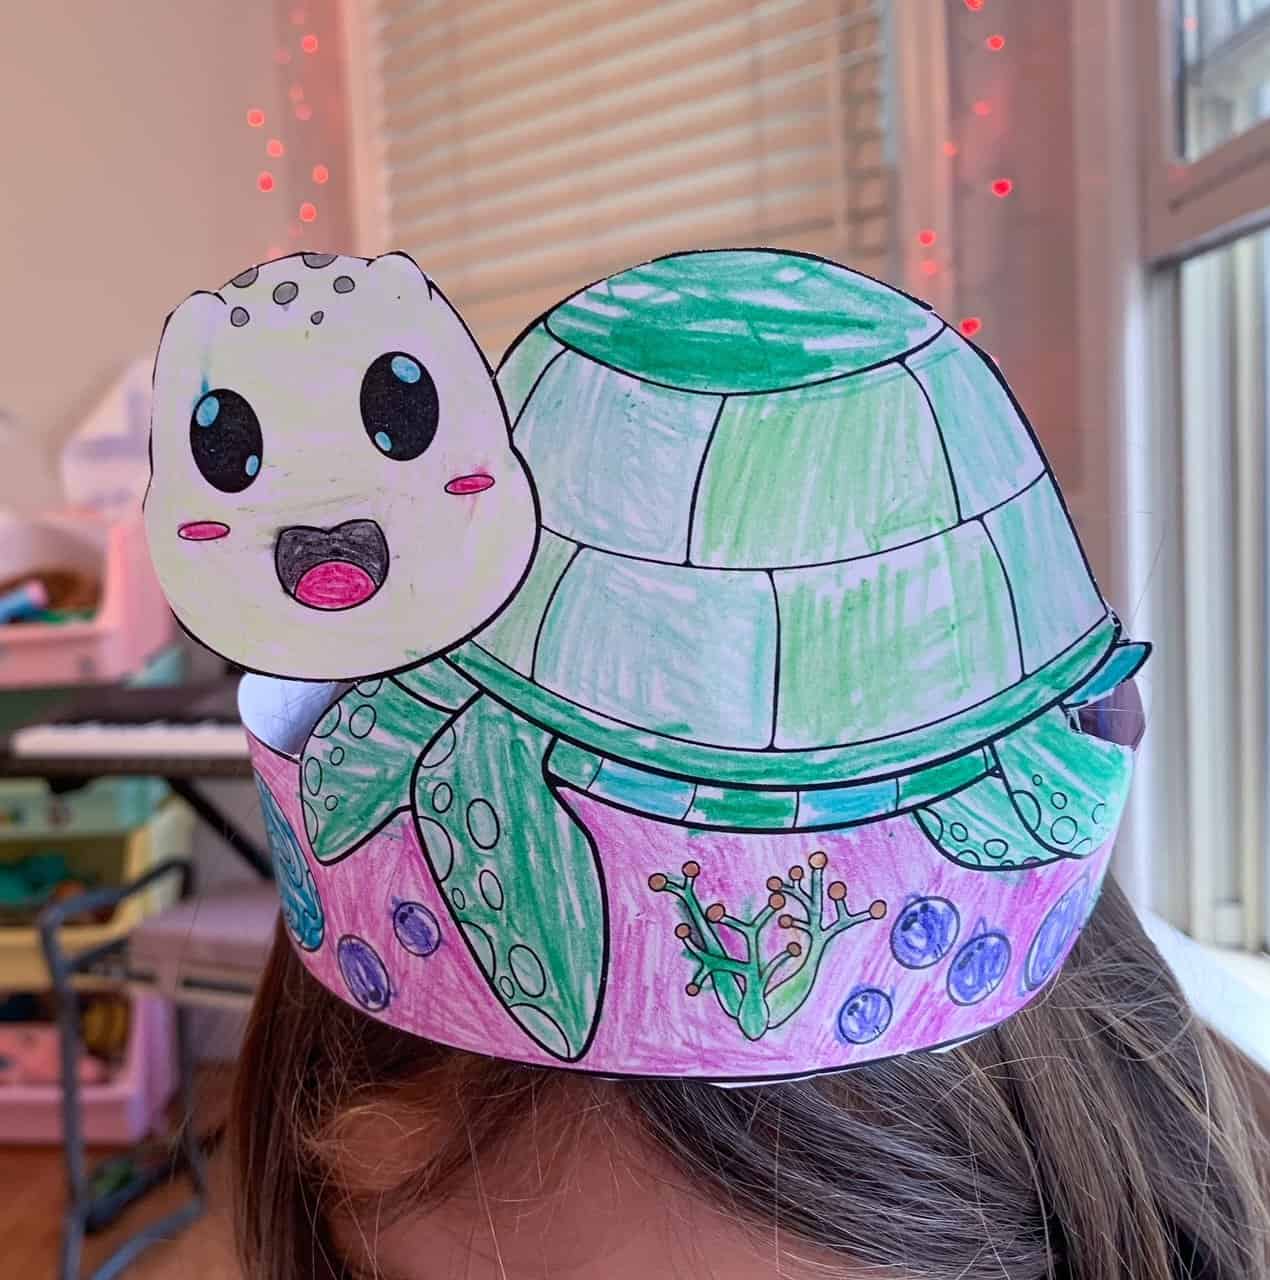 A completed sea turtle headband craft being worn on a girl's head